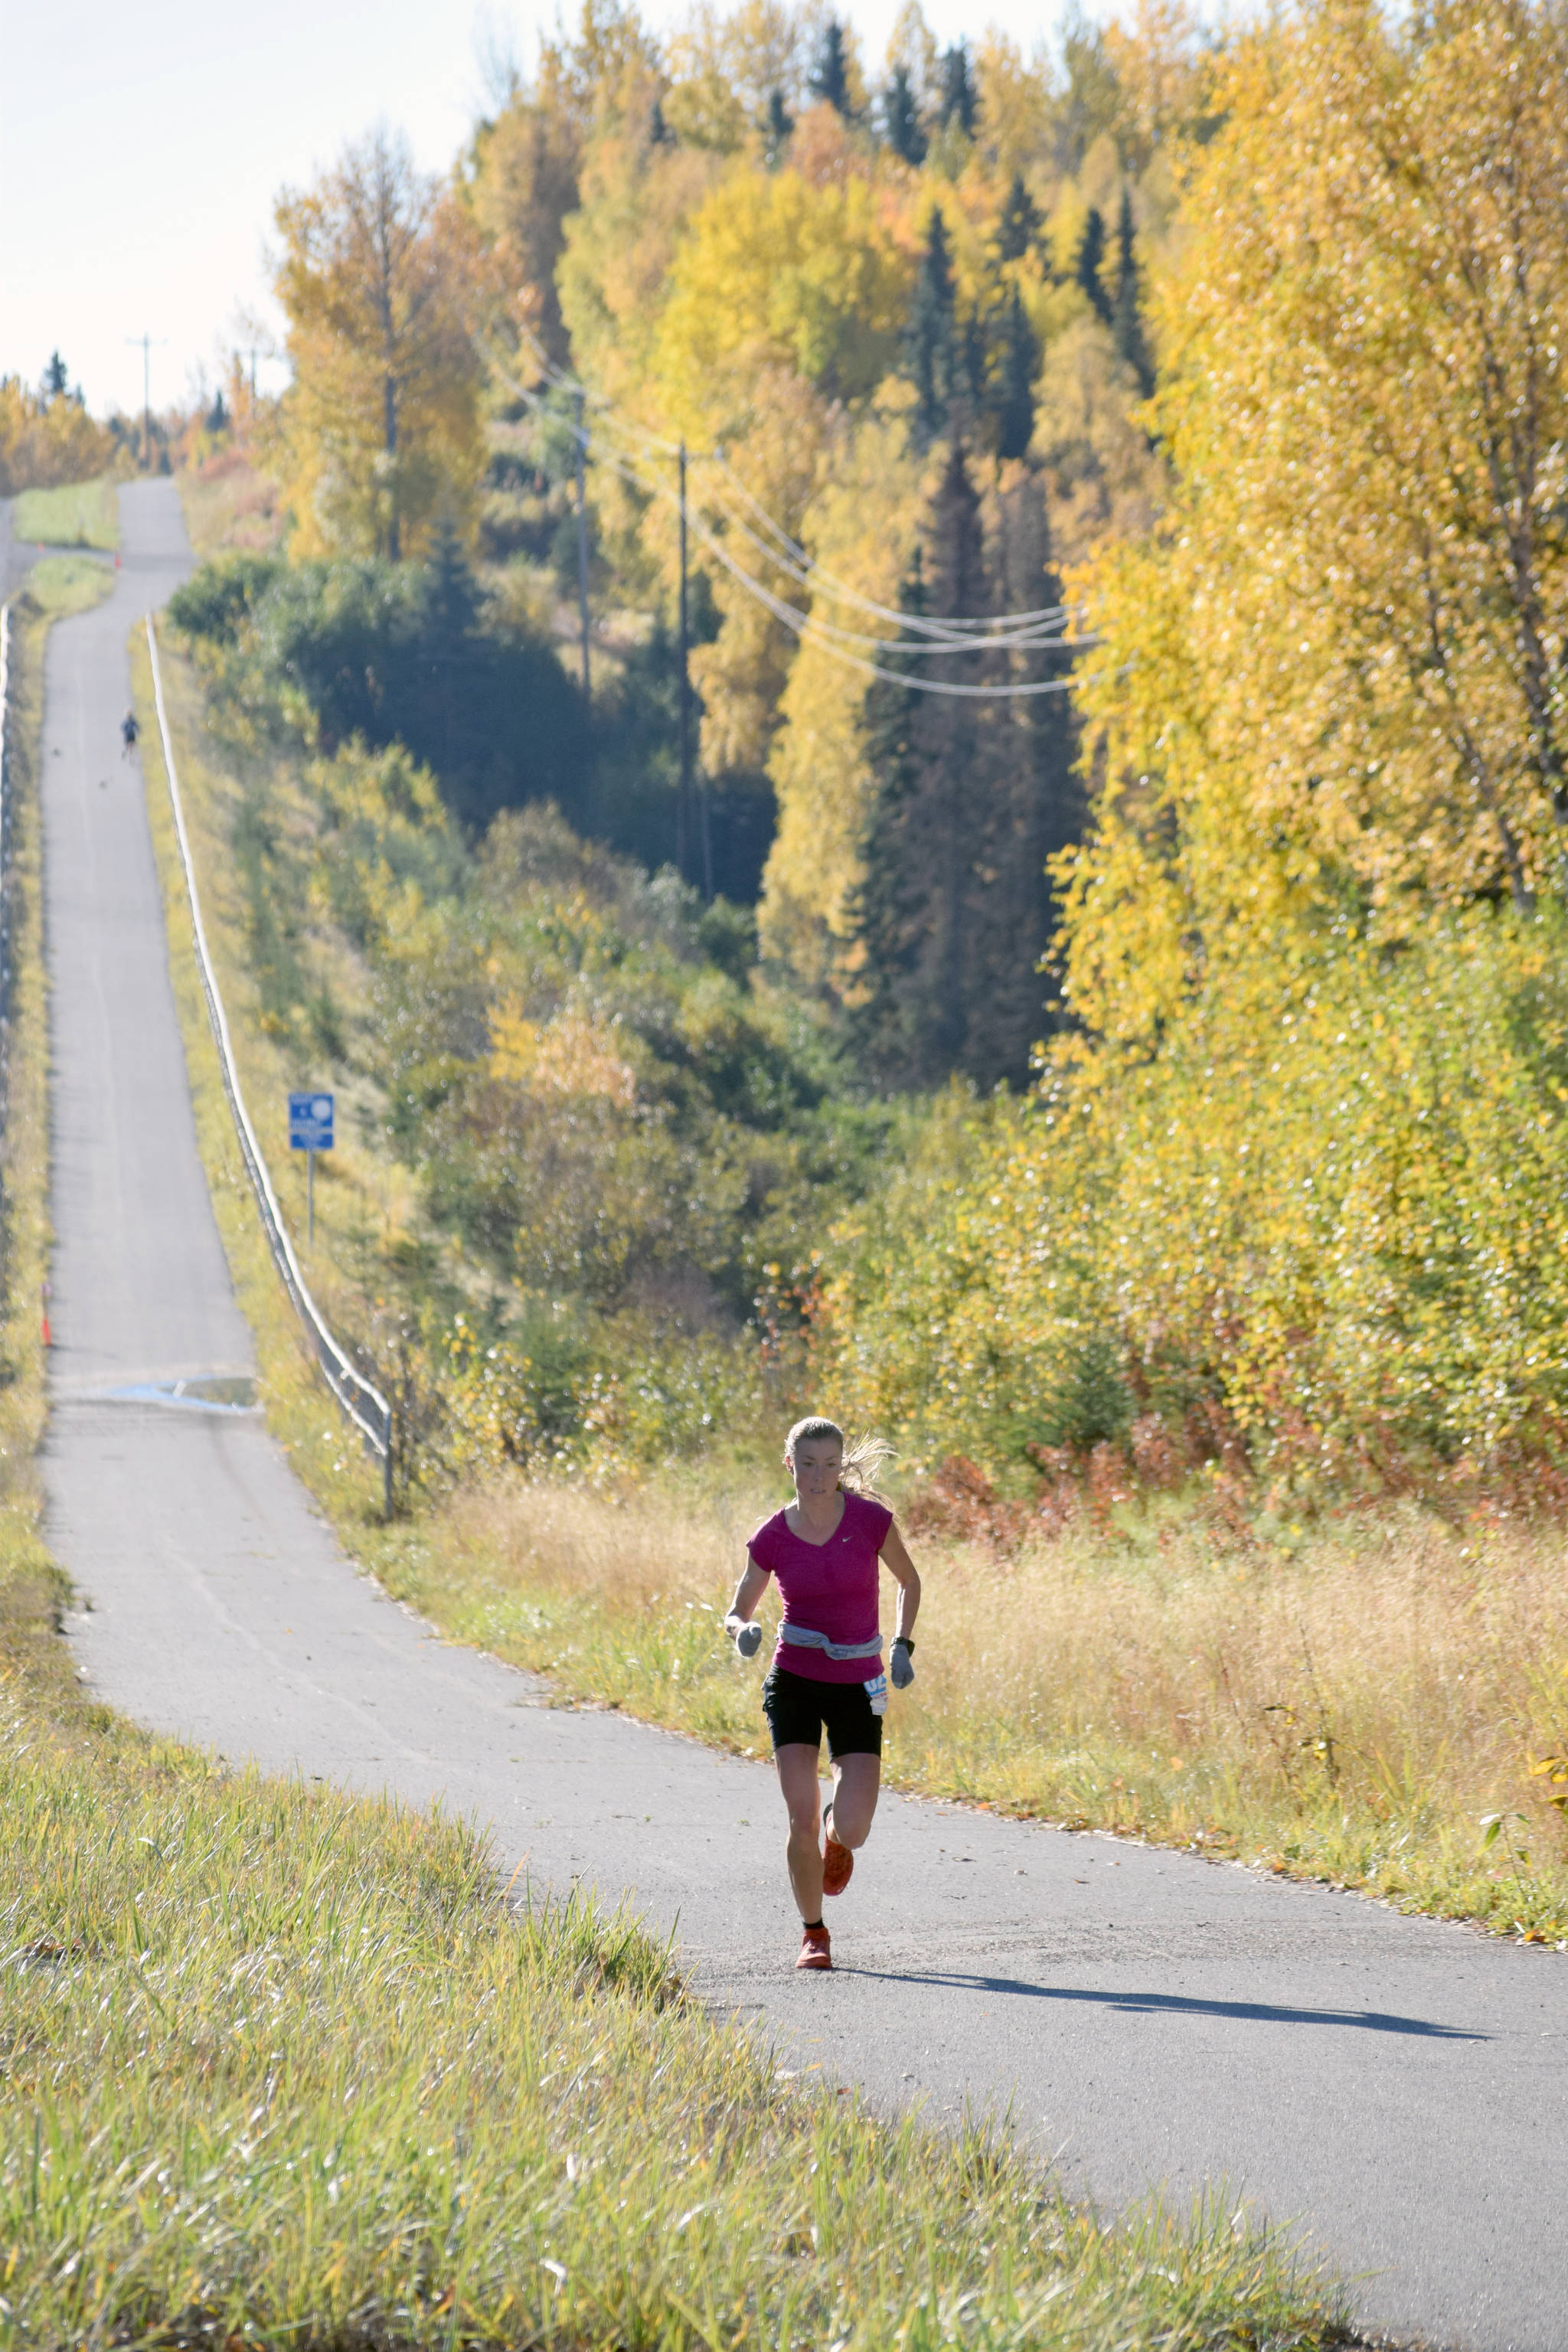 Palmer’s Christy Marvin climbs the last big hill on the Kenai Spur Highway on the way to victory in the women’s Kenai River Marathon on Sunday, Sept. 30, 2018. (Photo by Jeff Helminiak/Peninsula Clarion)